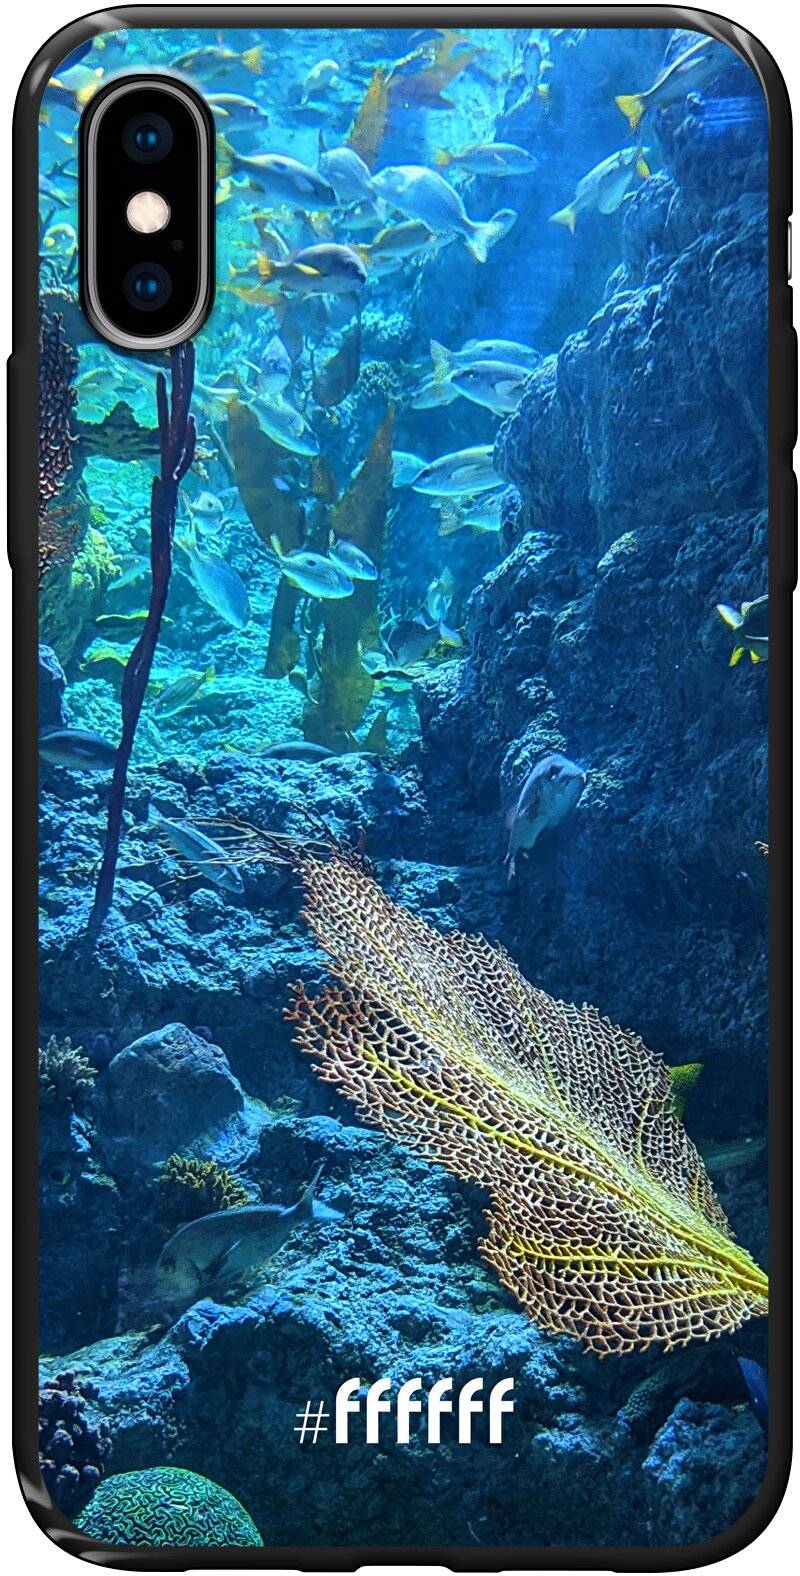 Coral Reef iPhone X